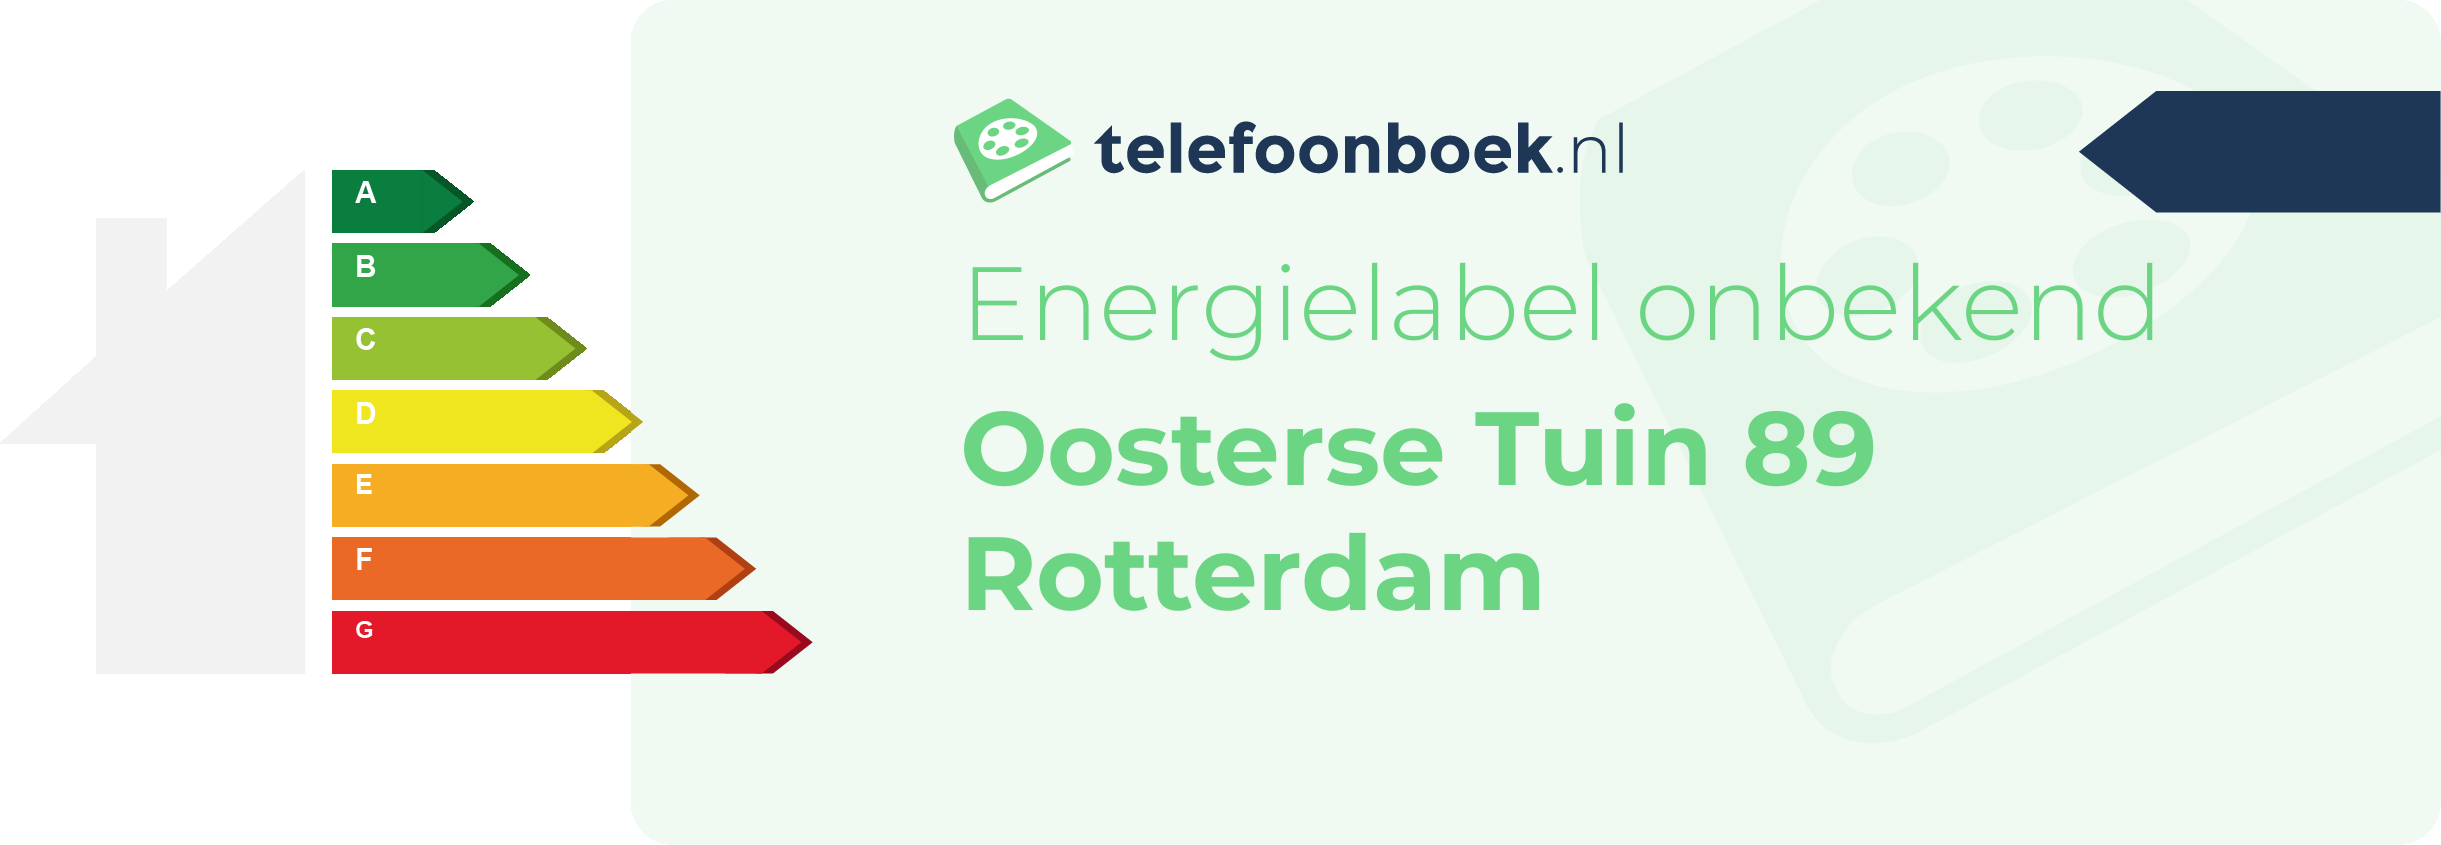 Energielabel Oosterse Tuin 89 Rotterdam